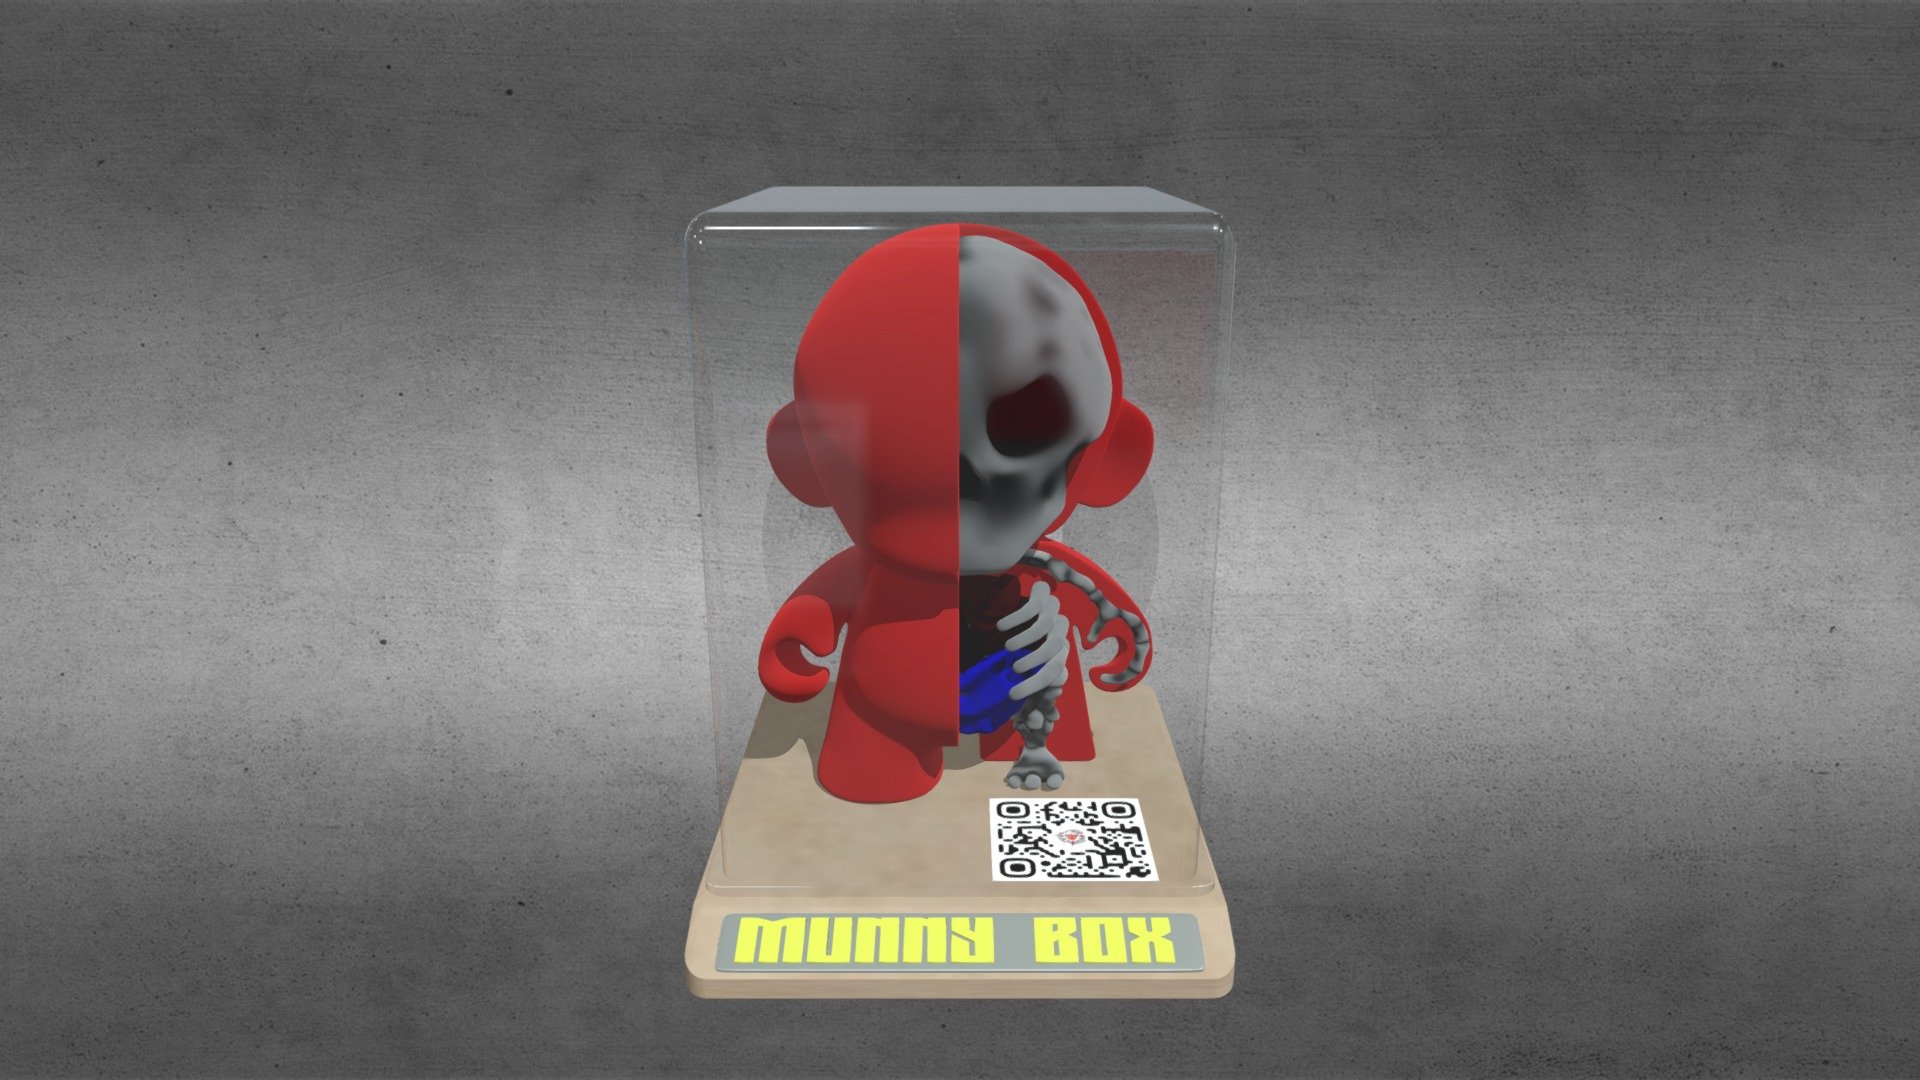 This 3d model is built for use in 
https://spatial.io/
A free and easy to use 3d metaverse space of your own where you can show off your virtual toy collection

Check them out in my spatial space
 https://spatial.io/s/GKIDS-NFTS-629d990e03163e0001baeed9?share=5468023796012477353

To have this opened up as a free download head to https://gkids.co.nz/munnybox - Munny Box Red - 3D model by GraffitiKids on wax (GKiD) (@graffitikids) 3d model